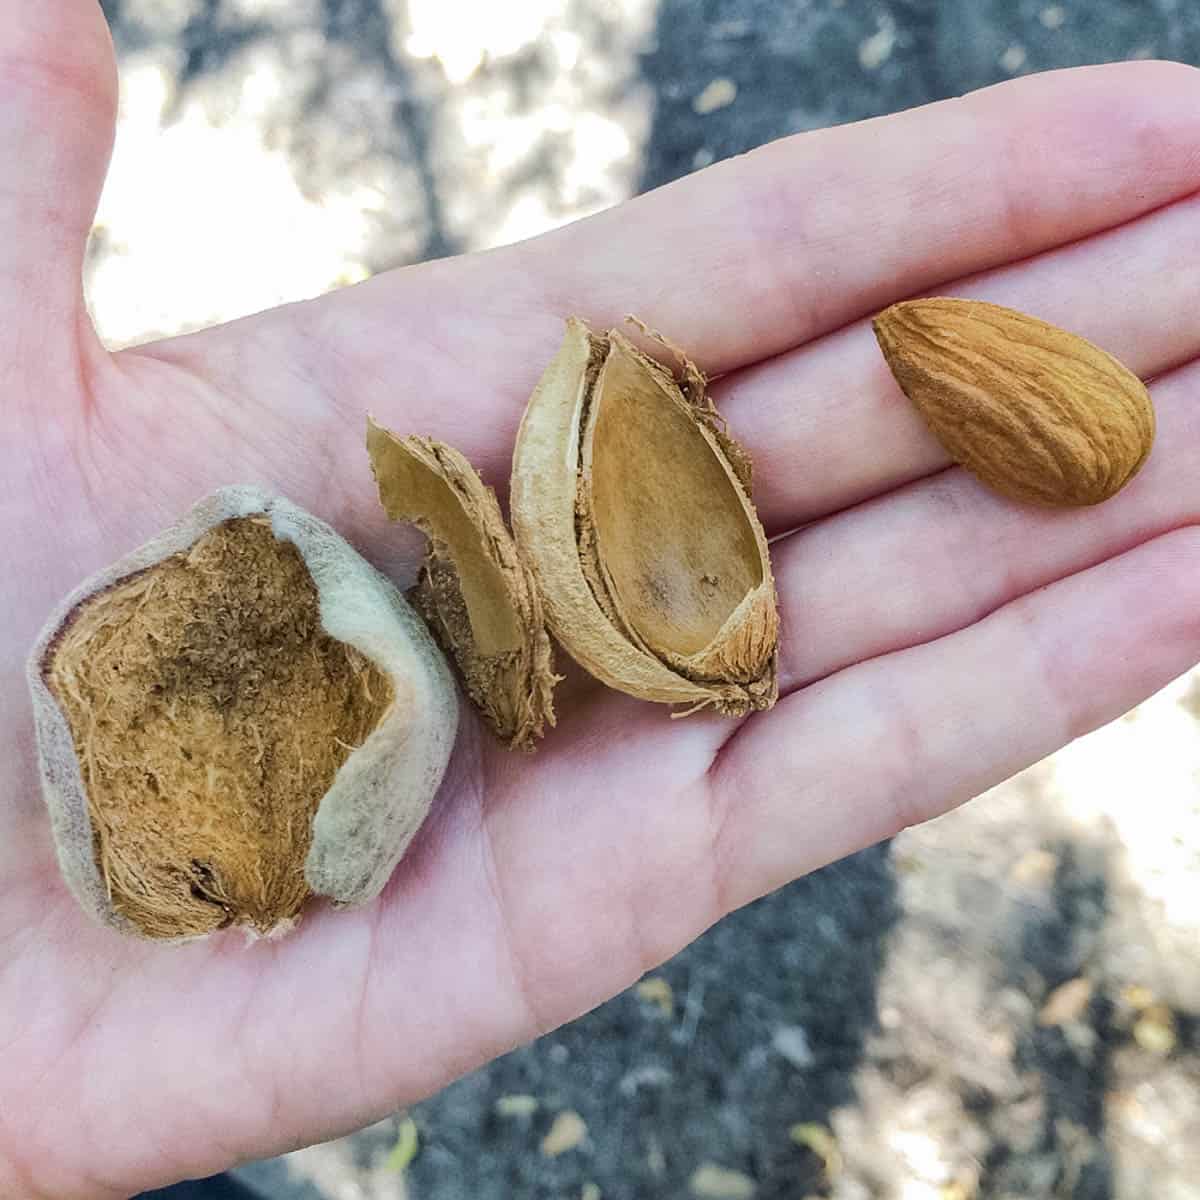 hand holding a whole fresh almond with the hull and shell.